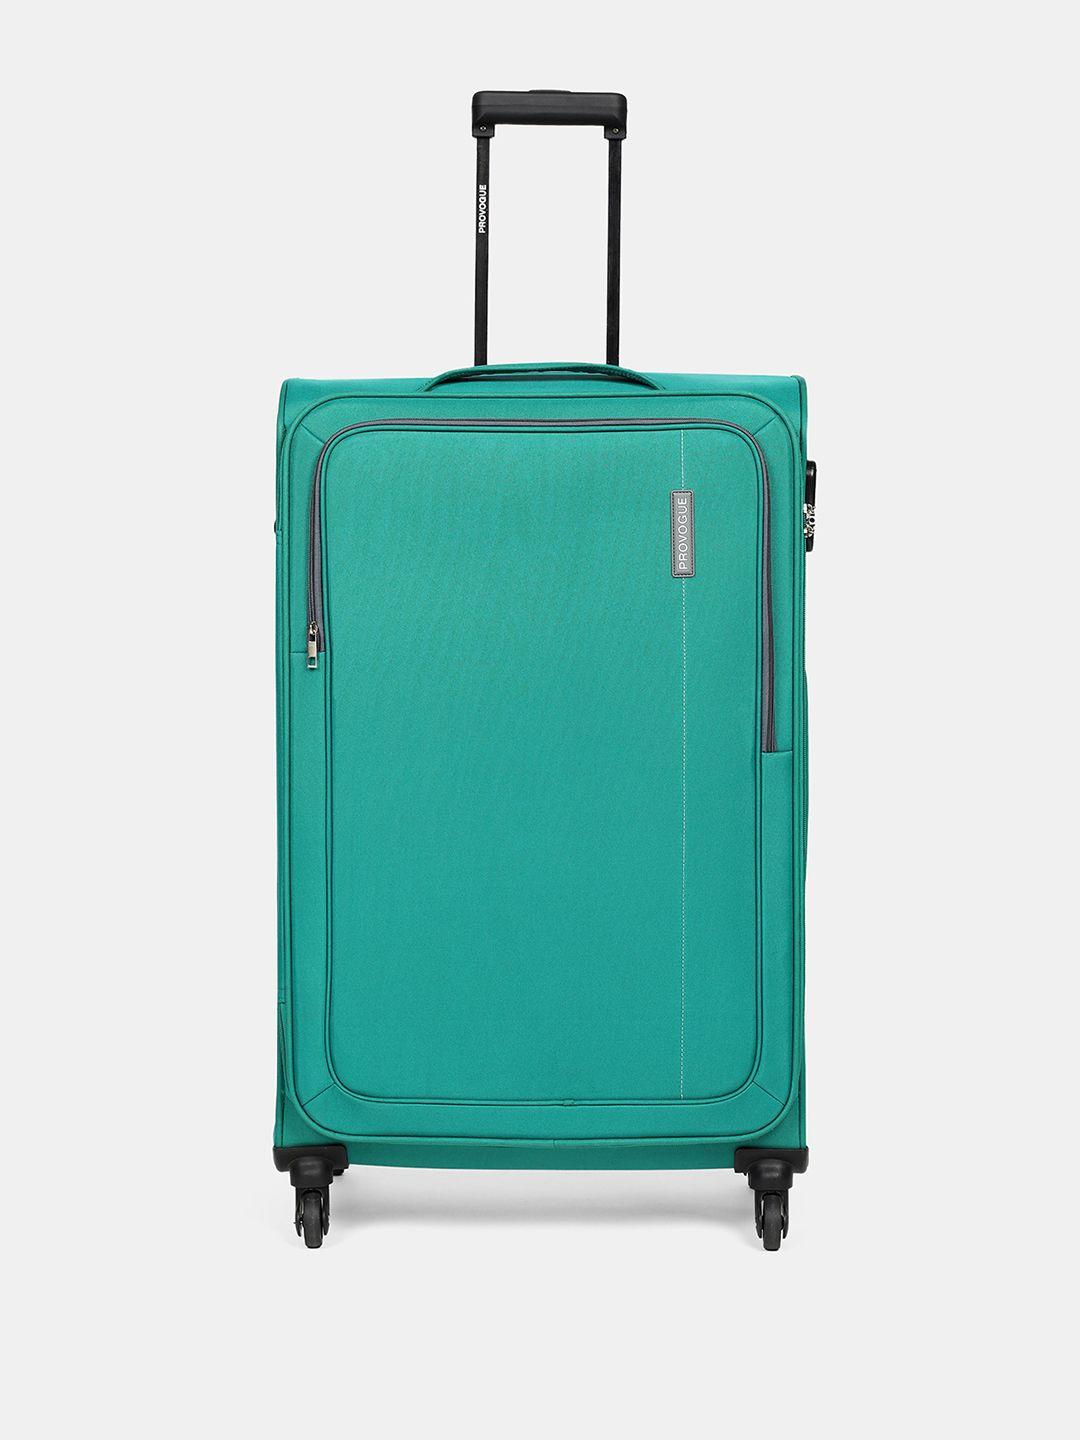 provogue lead large trolley suitcase